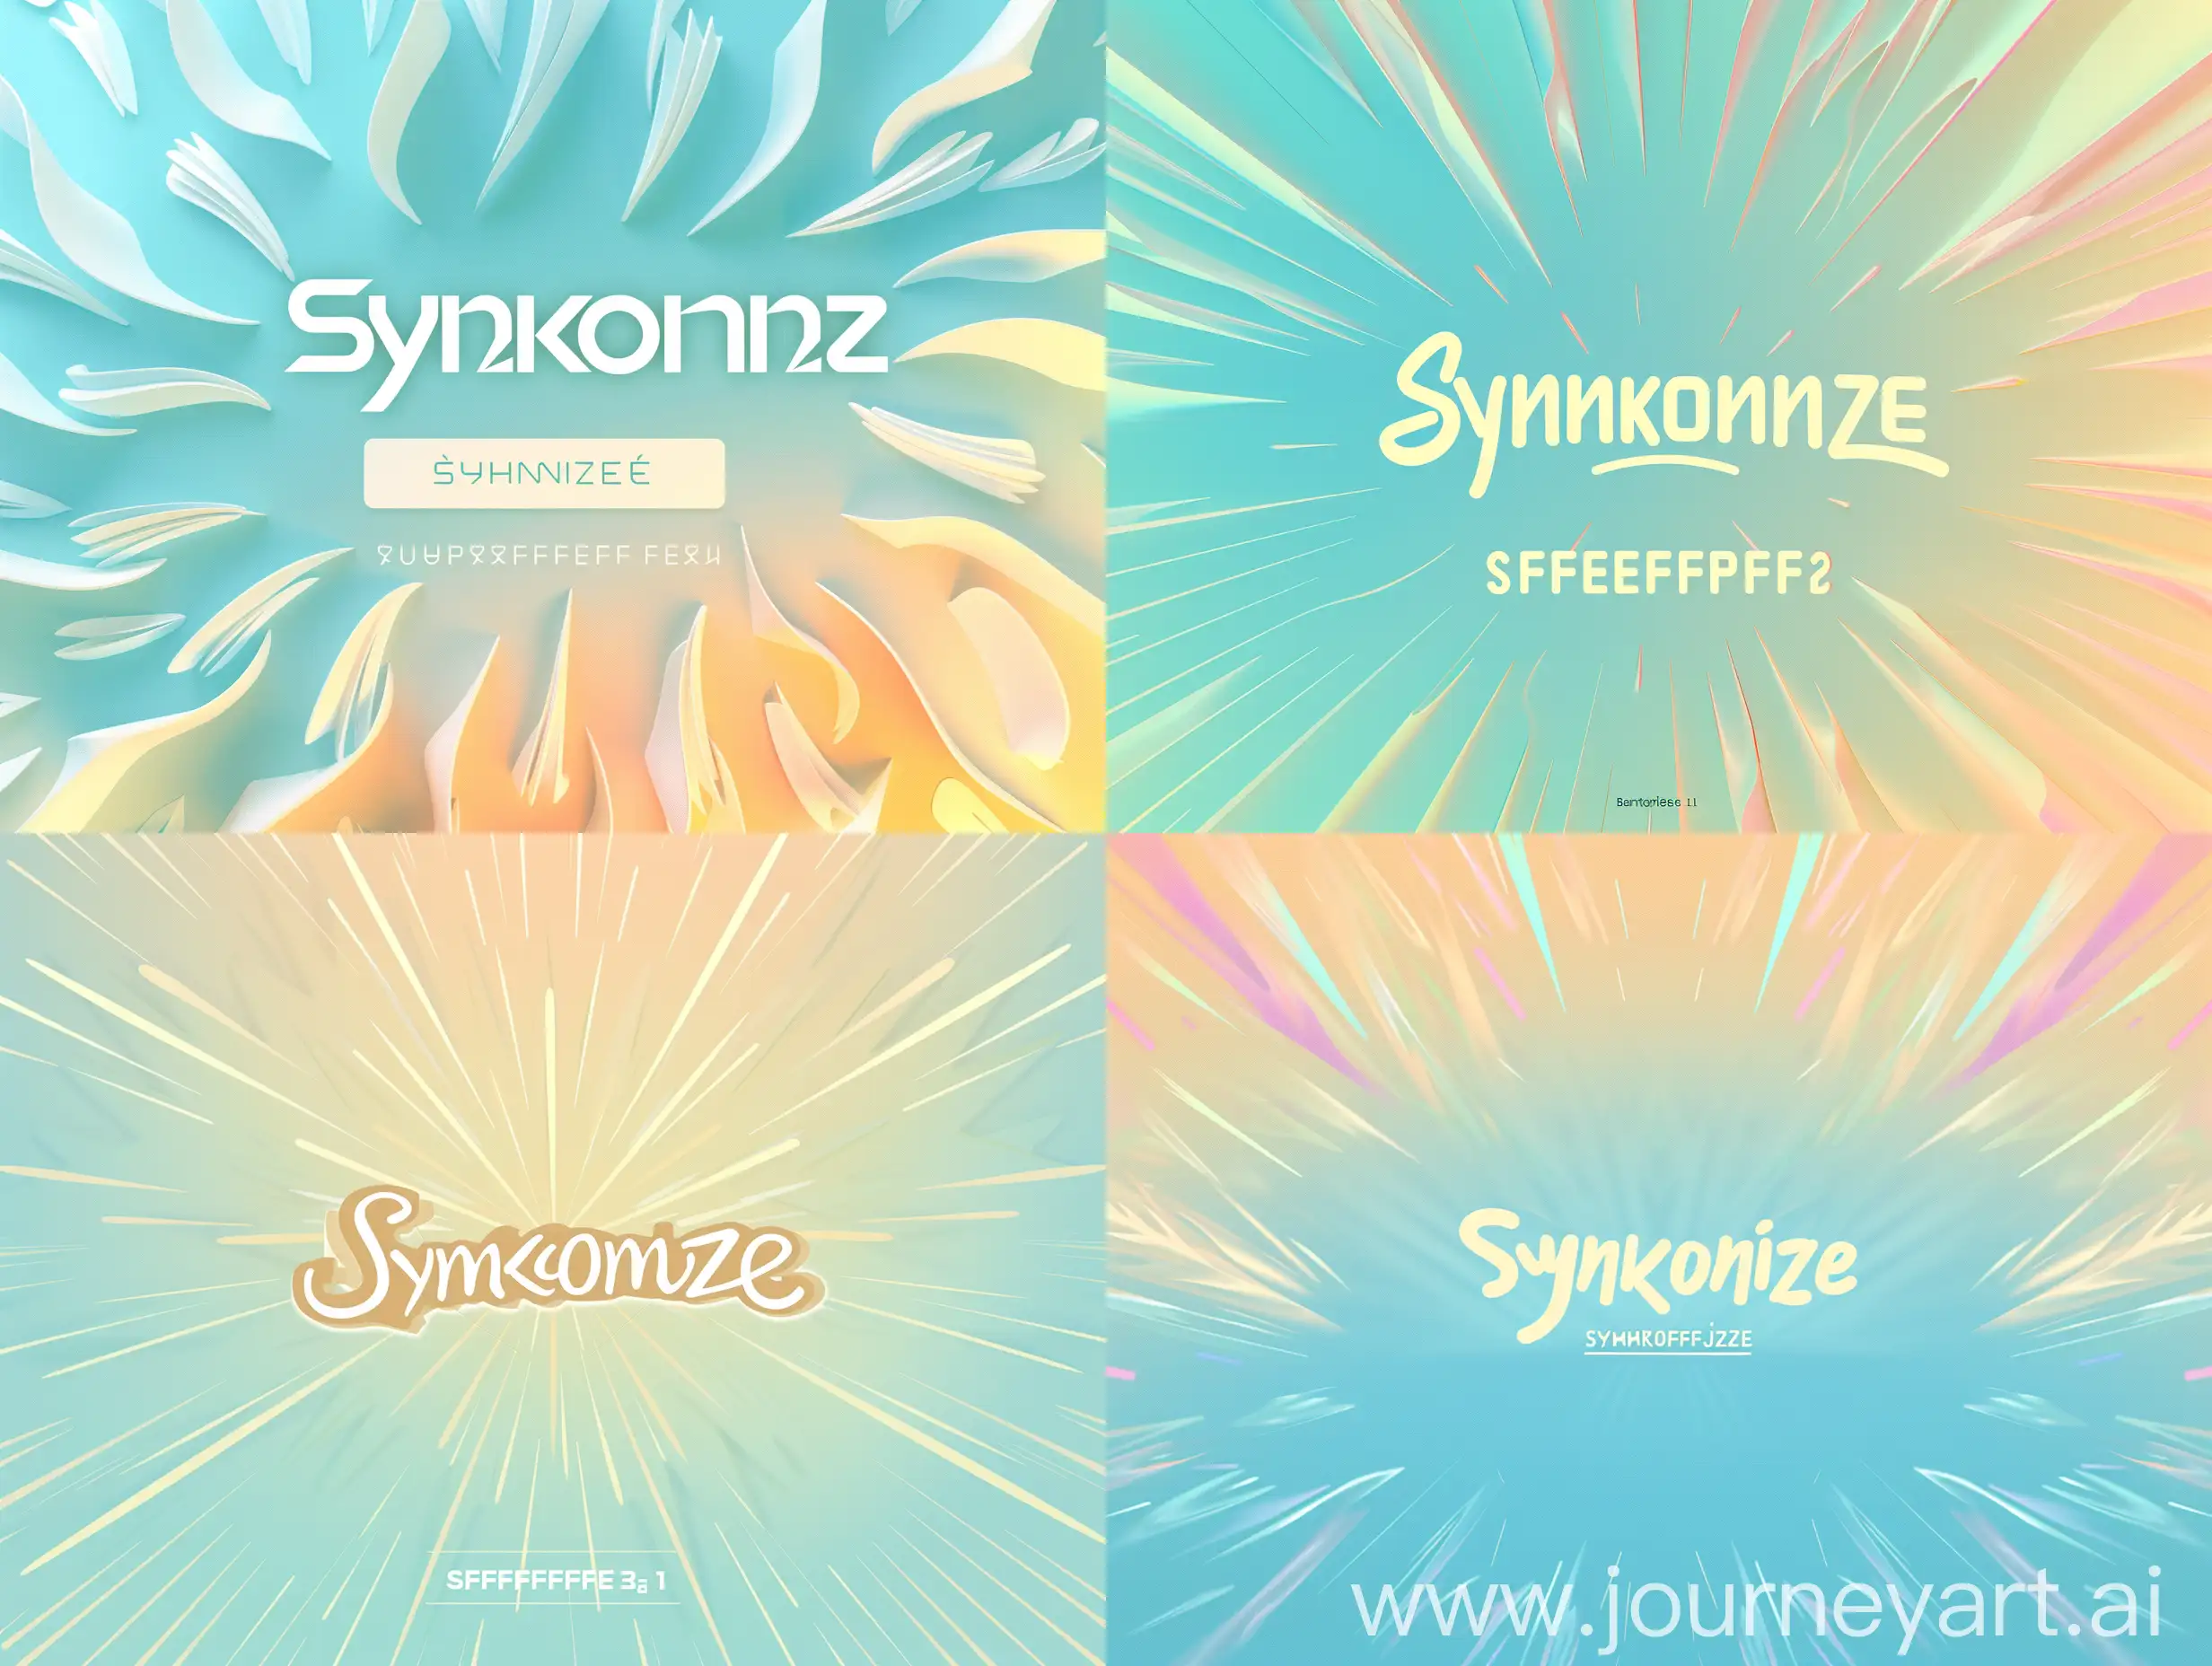 "Design the bento style cover sheet for 'Synkronize' on Behance. The cover features the project logo centrally placed, with a soft gradient background transitioning from pastel blue (#A3DAFB) to warm pastel yellow (#FFE4A1). The project title 'Synkronize' is prominently displayed below the logo in a bold, playful font in white (#FFFFFF). Subtle, dynamic elements radiate from the logo, creating a sense of movement and engagement."cover dessign style